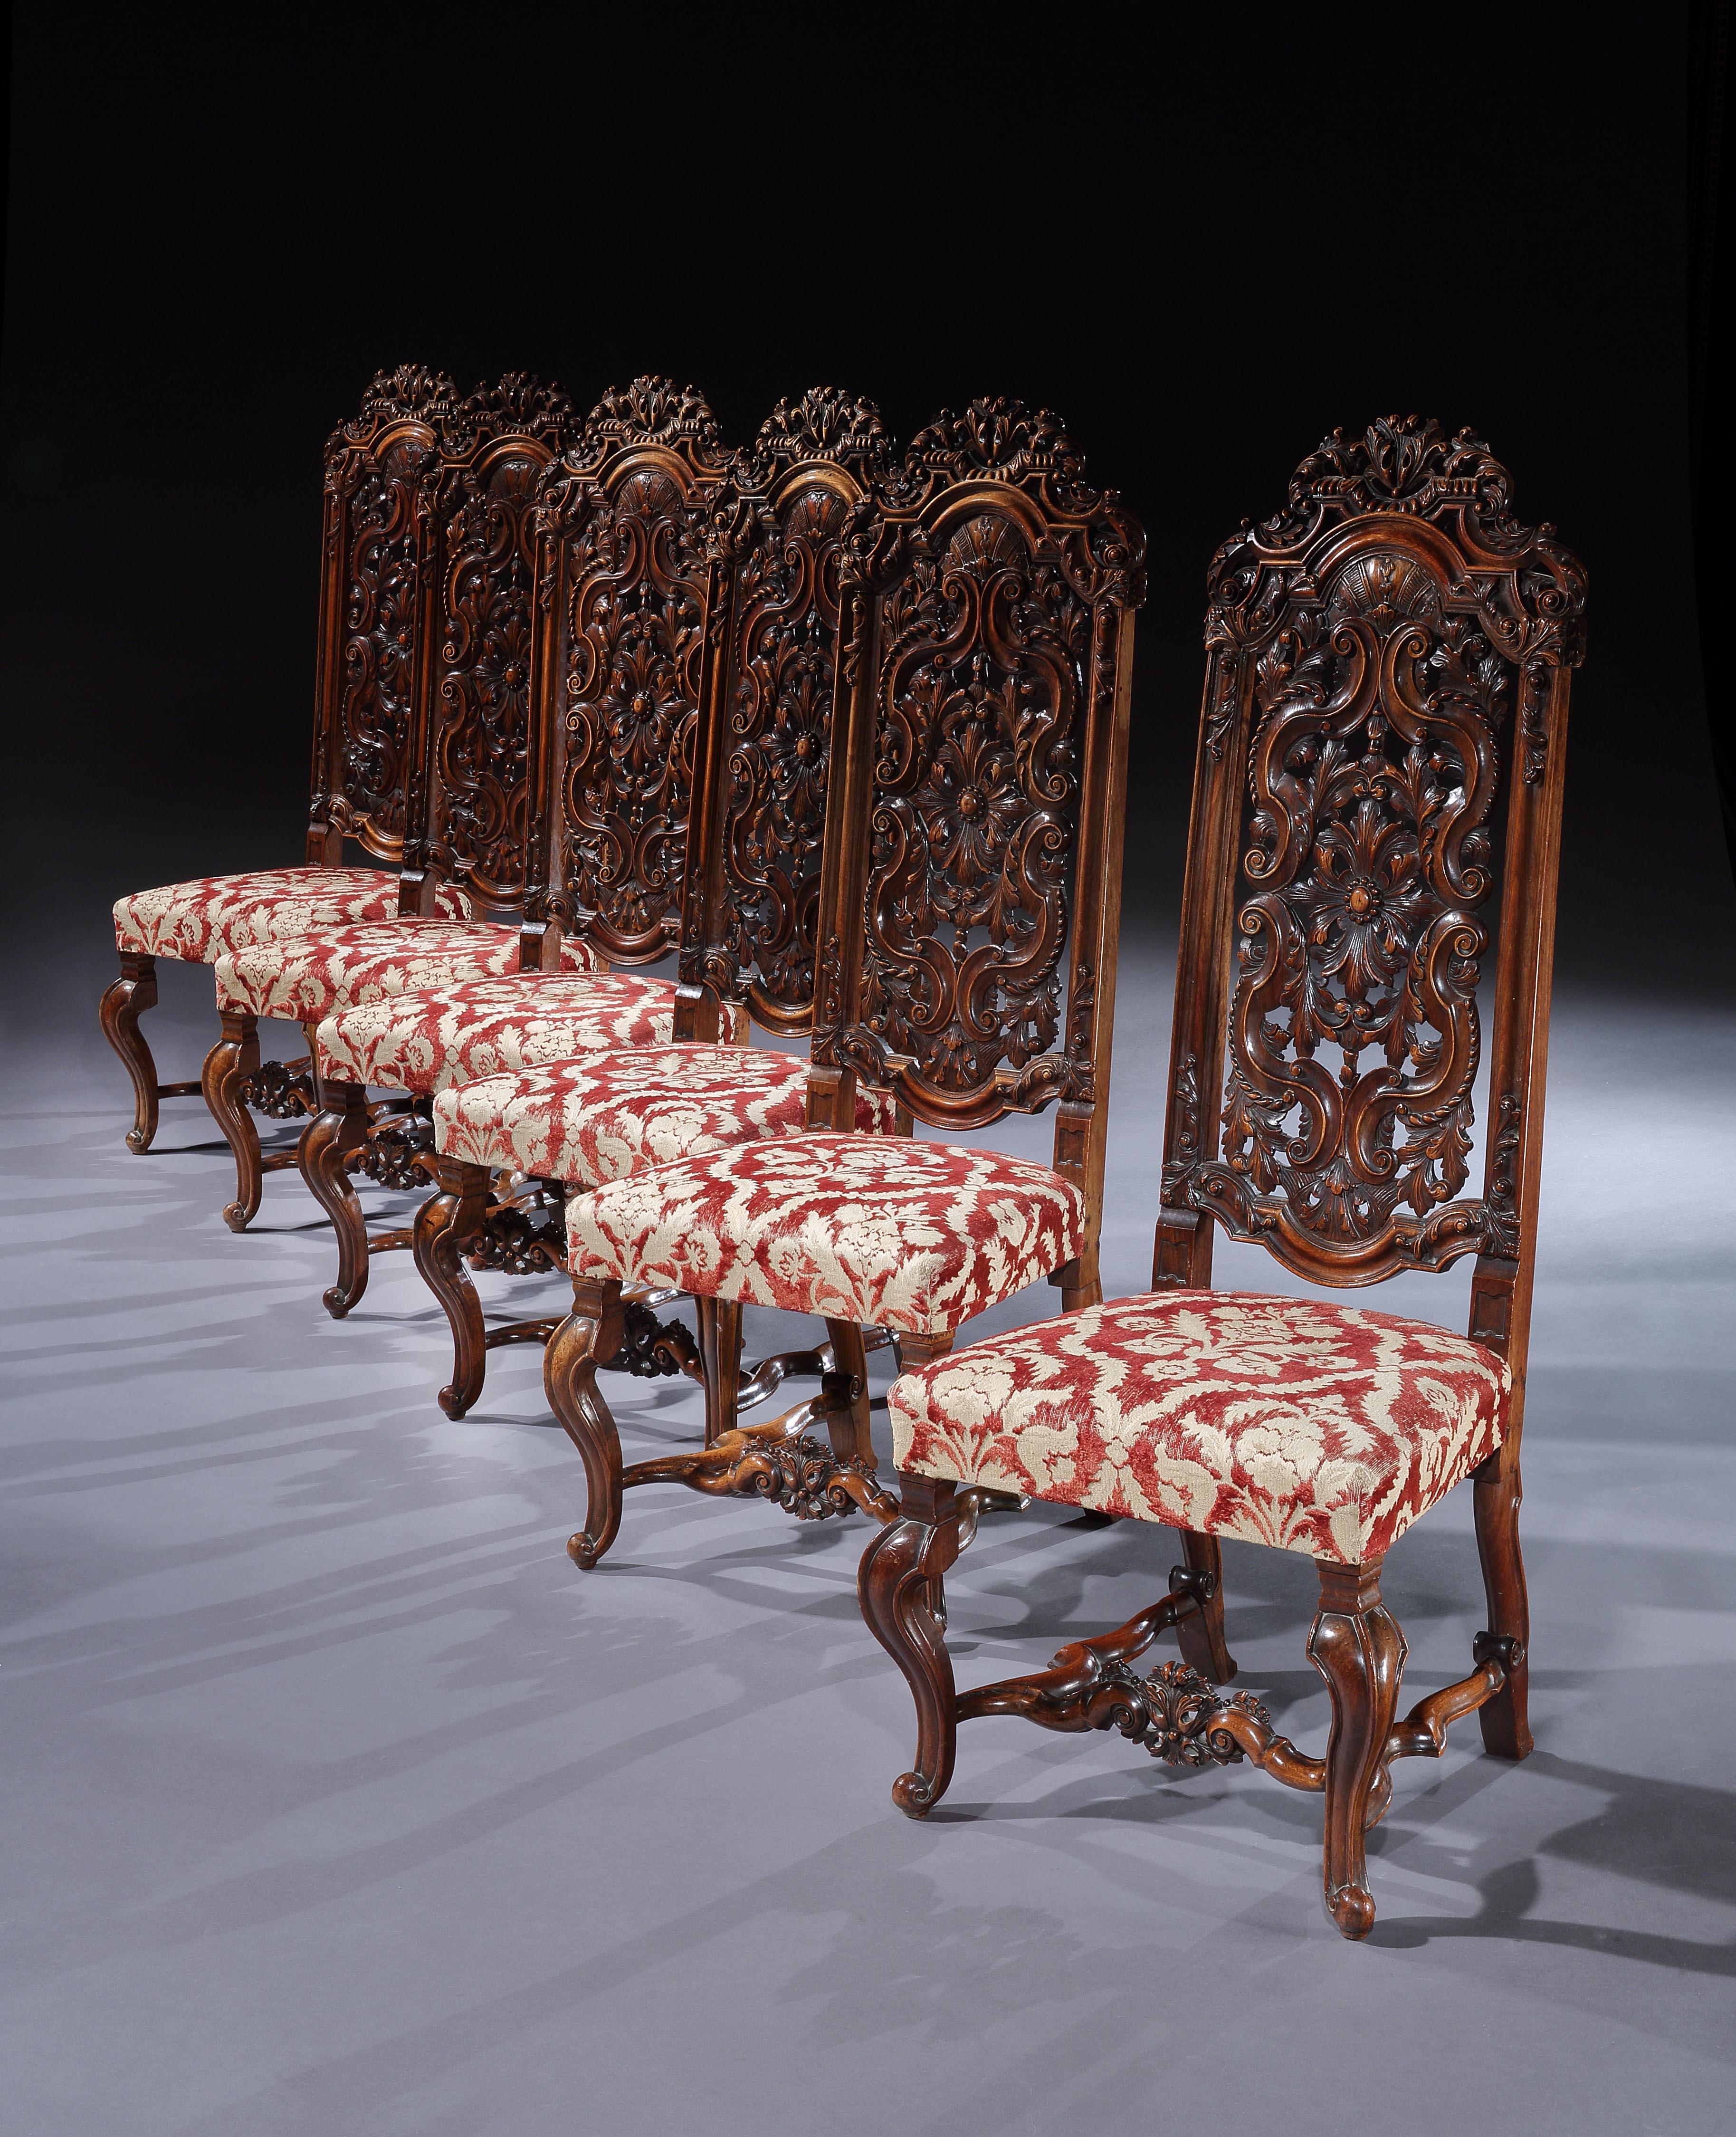 A fine, set of six, early 18th century, Anglo-Dutch, Daniel Marot inspired, walnut high back chairs. Back height 51.5 inch.

These are of the type that one sees either illustrated in classic reference books, or standing in grand country houses and